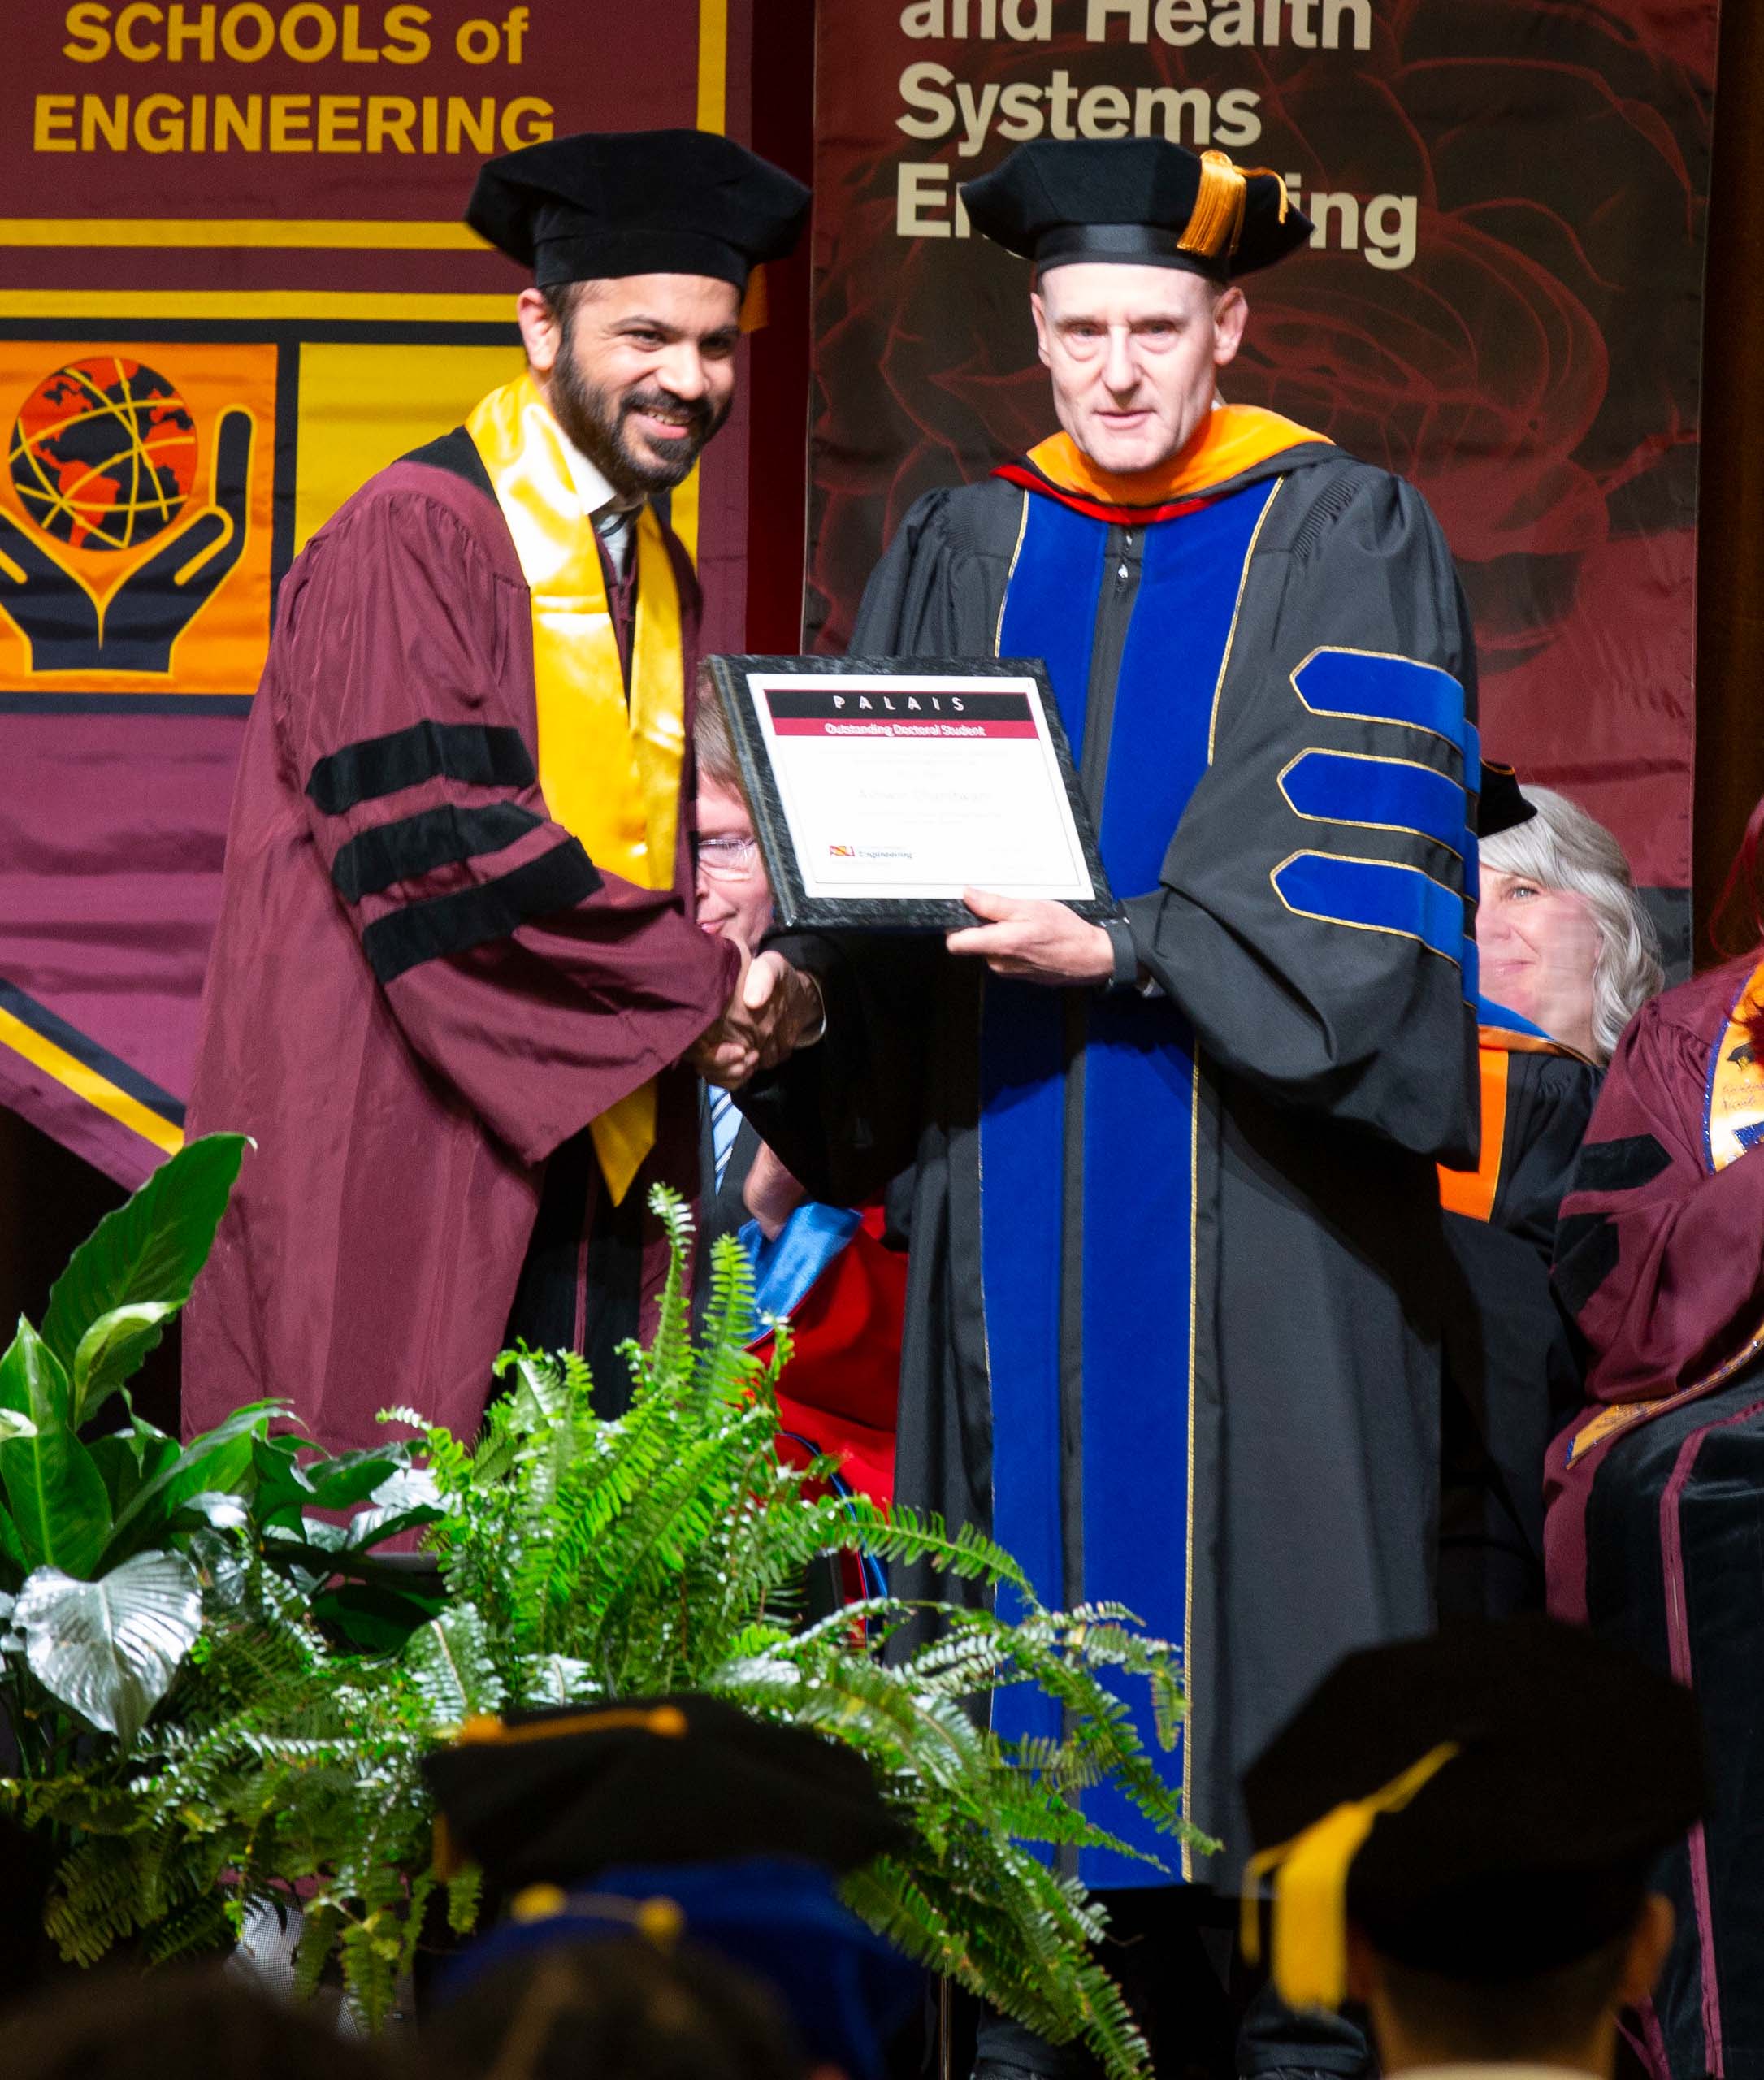 Ashwin Chandwani receives the Palais Outstanding Doctoral Student Award from Stephen Phillips